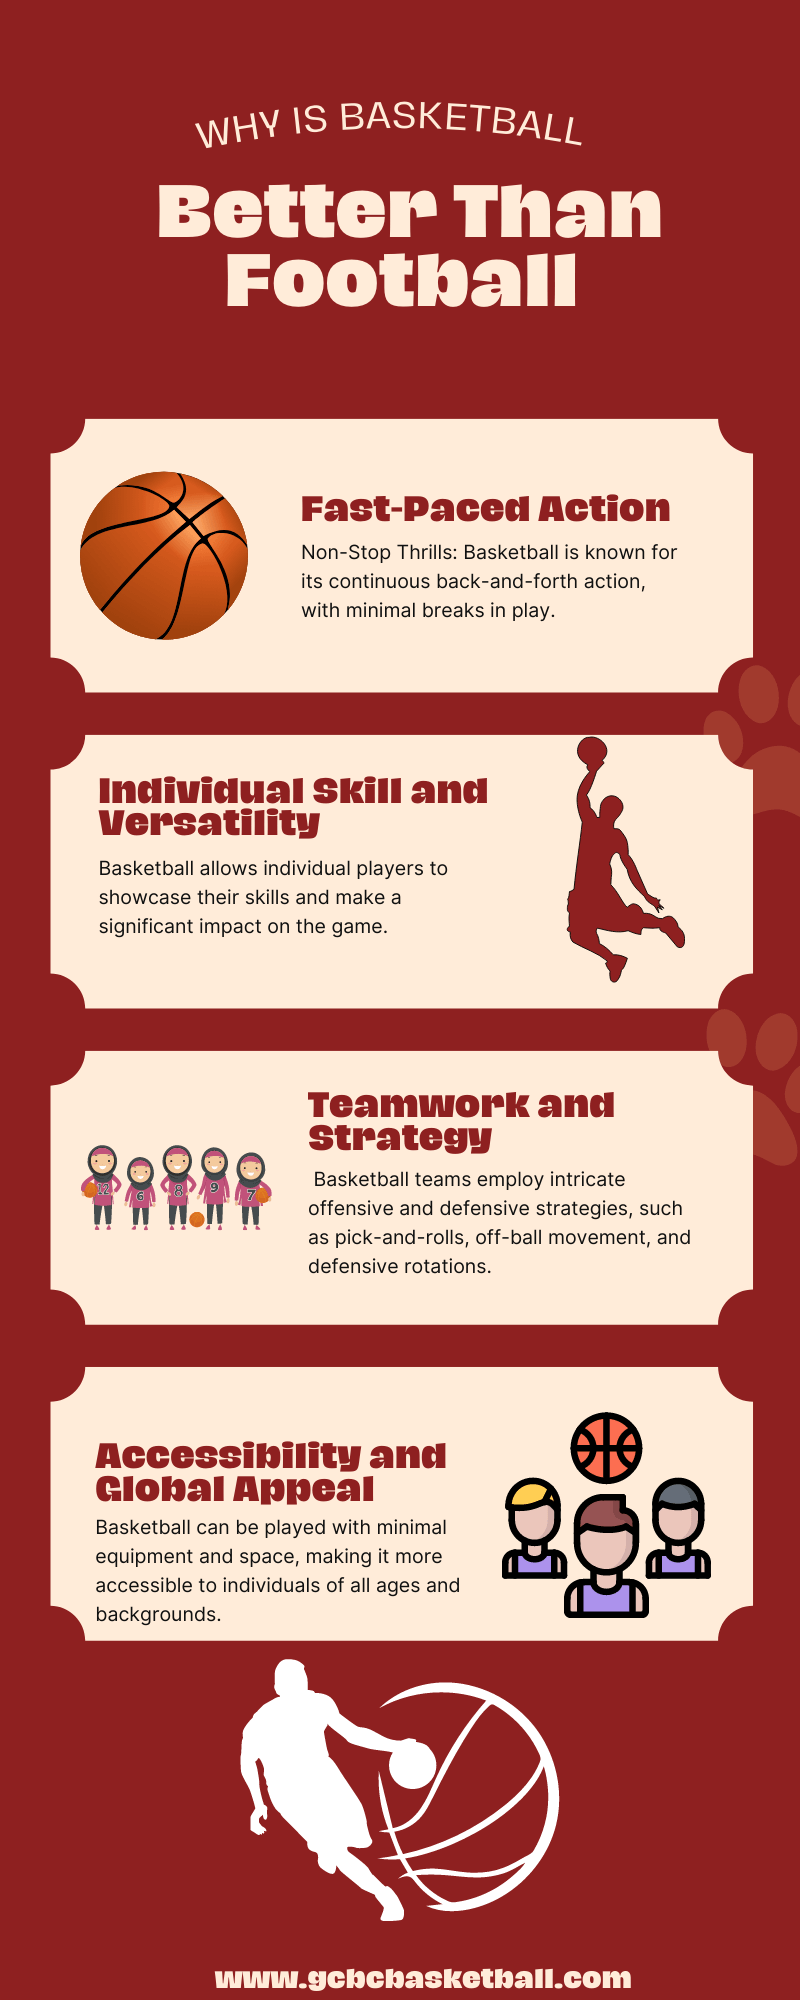 What Are The Differences Between Football And Basketball?